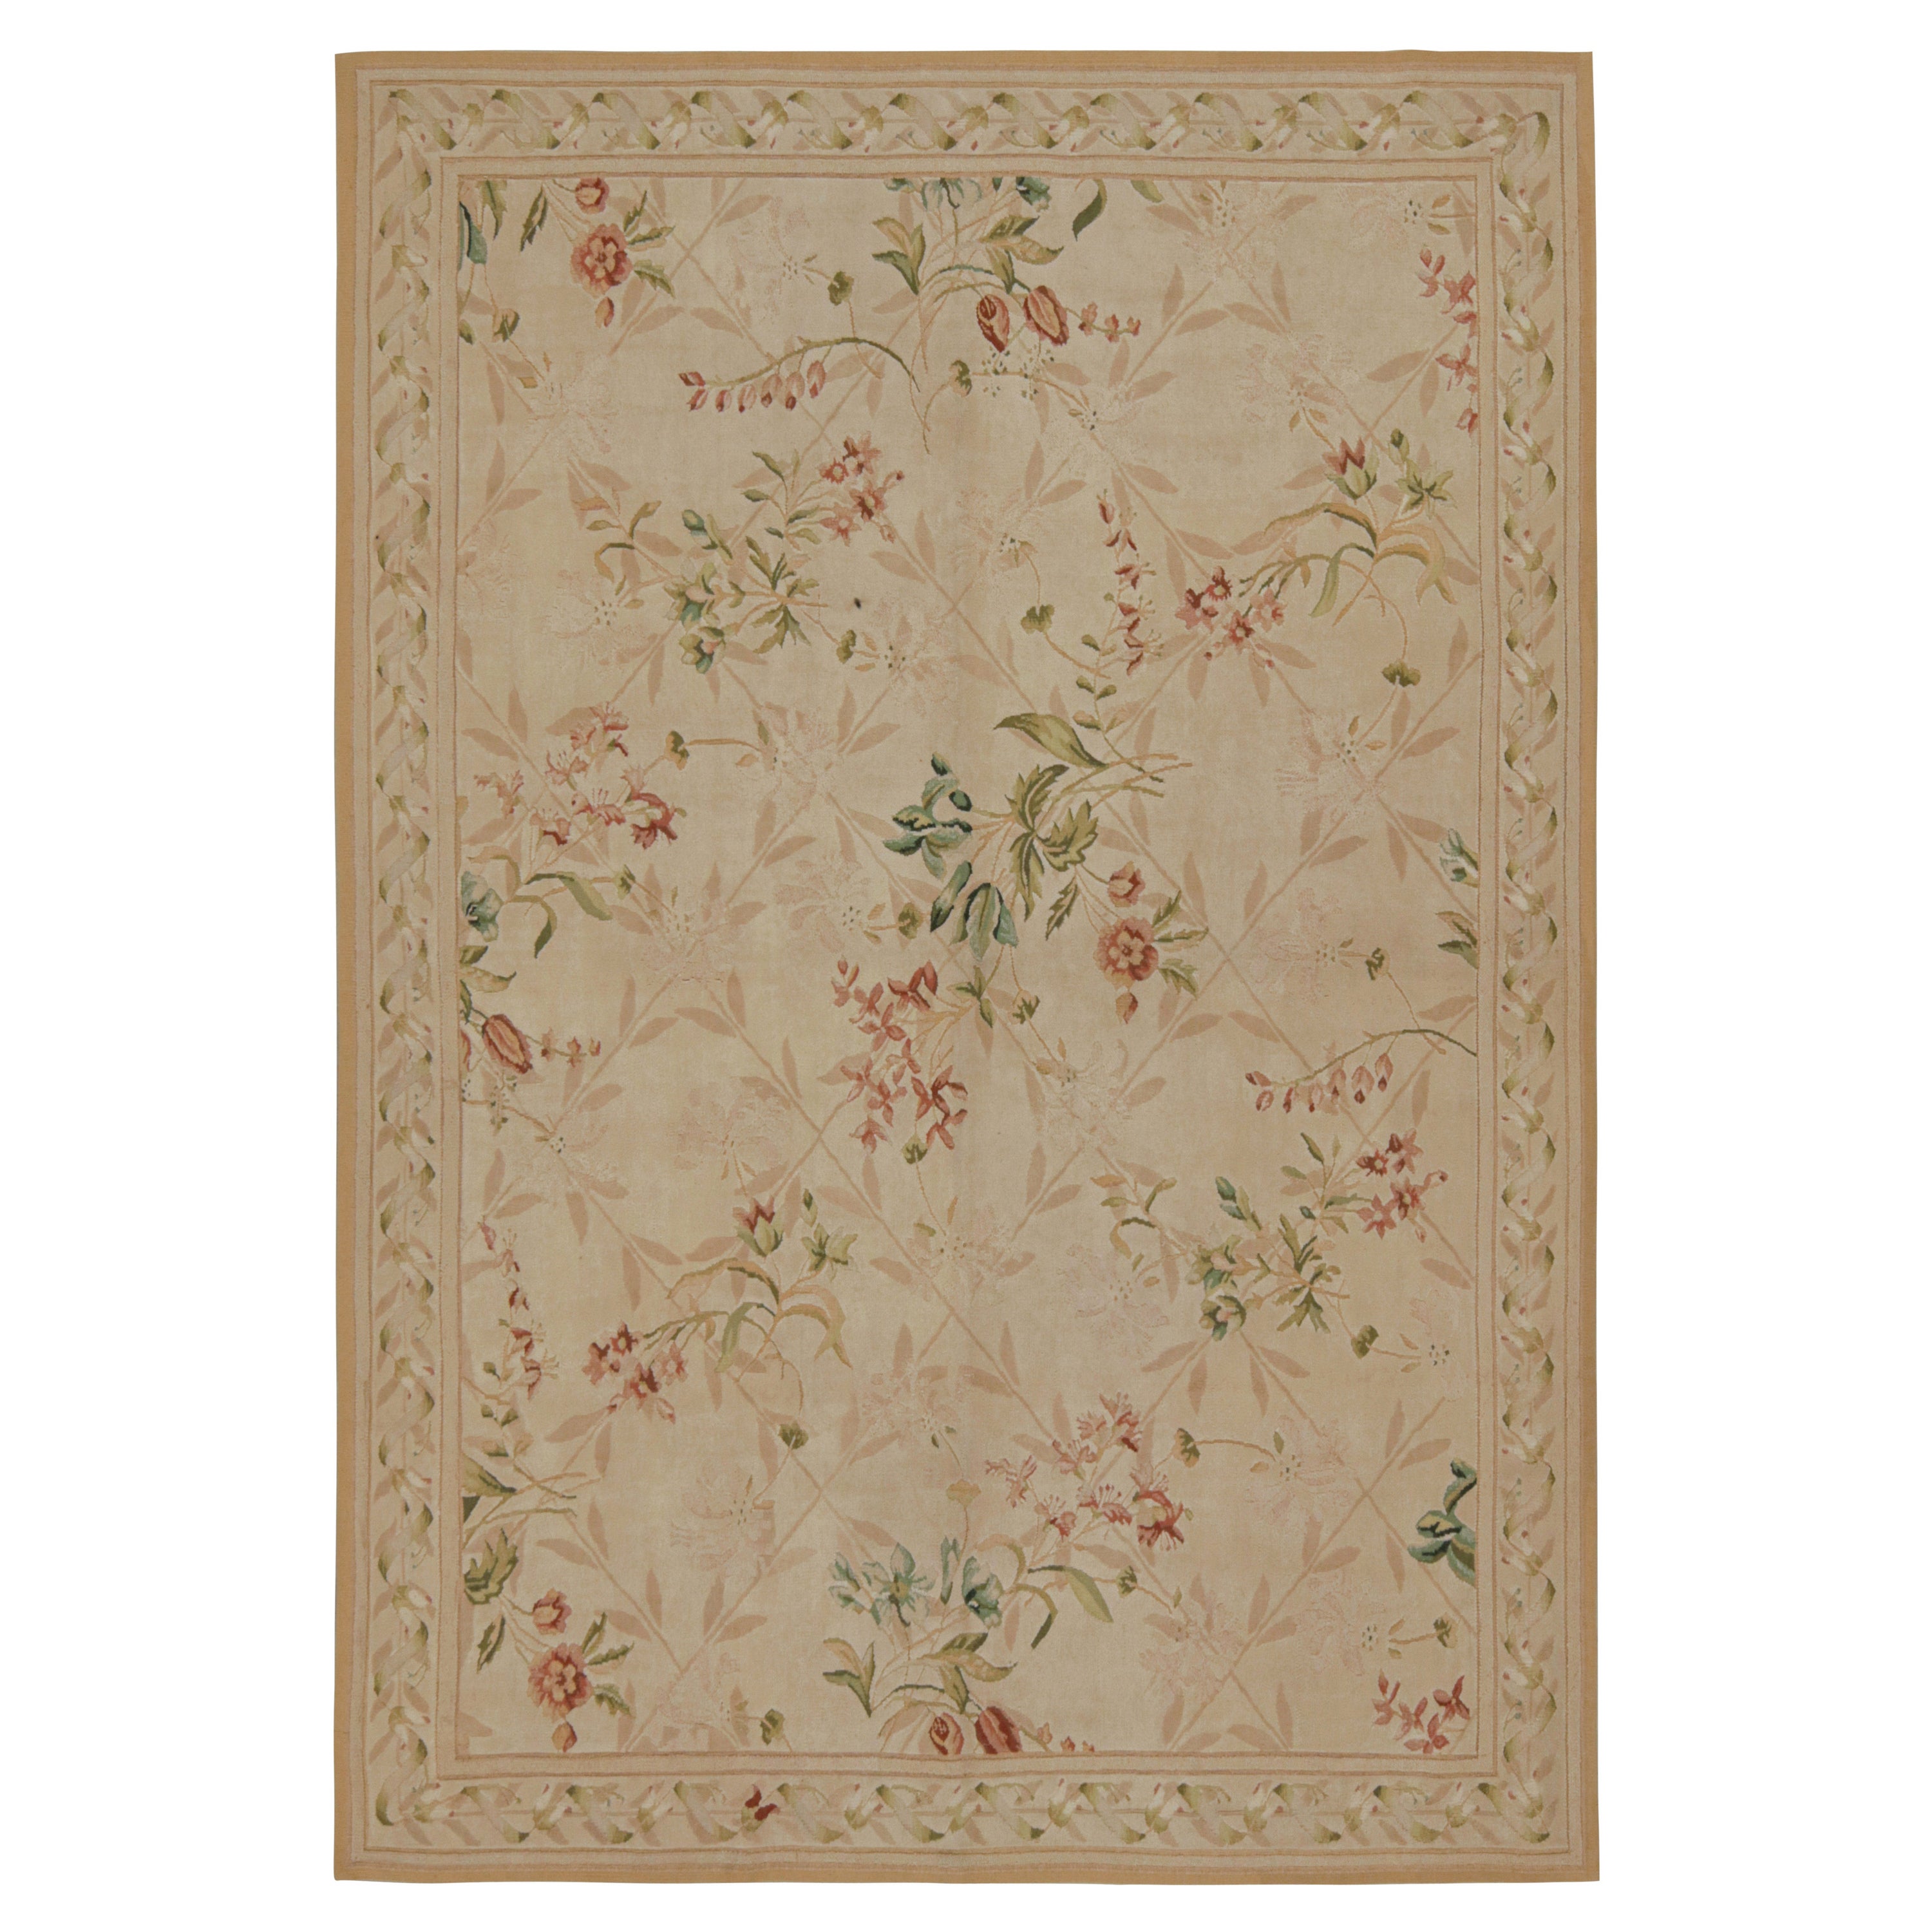 Rug & kilim’s European Flatweave Rug in Beige with Green and Pink Floral Pattern For Sale